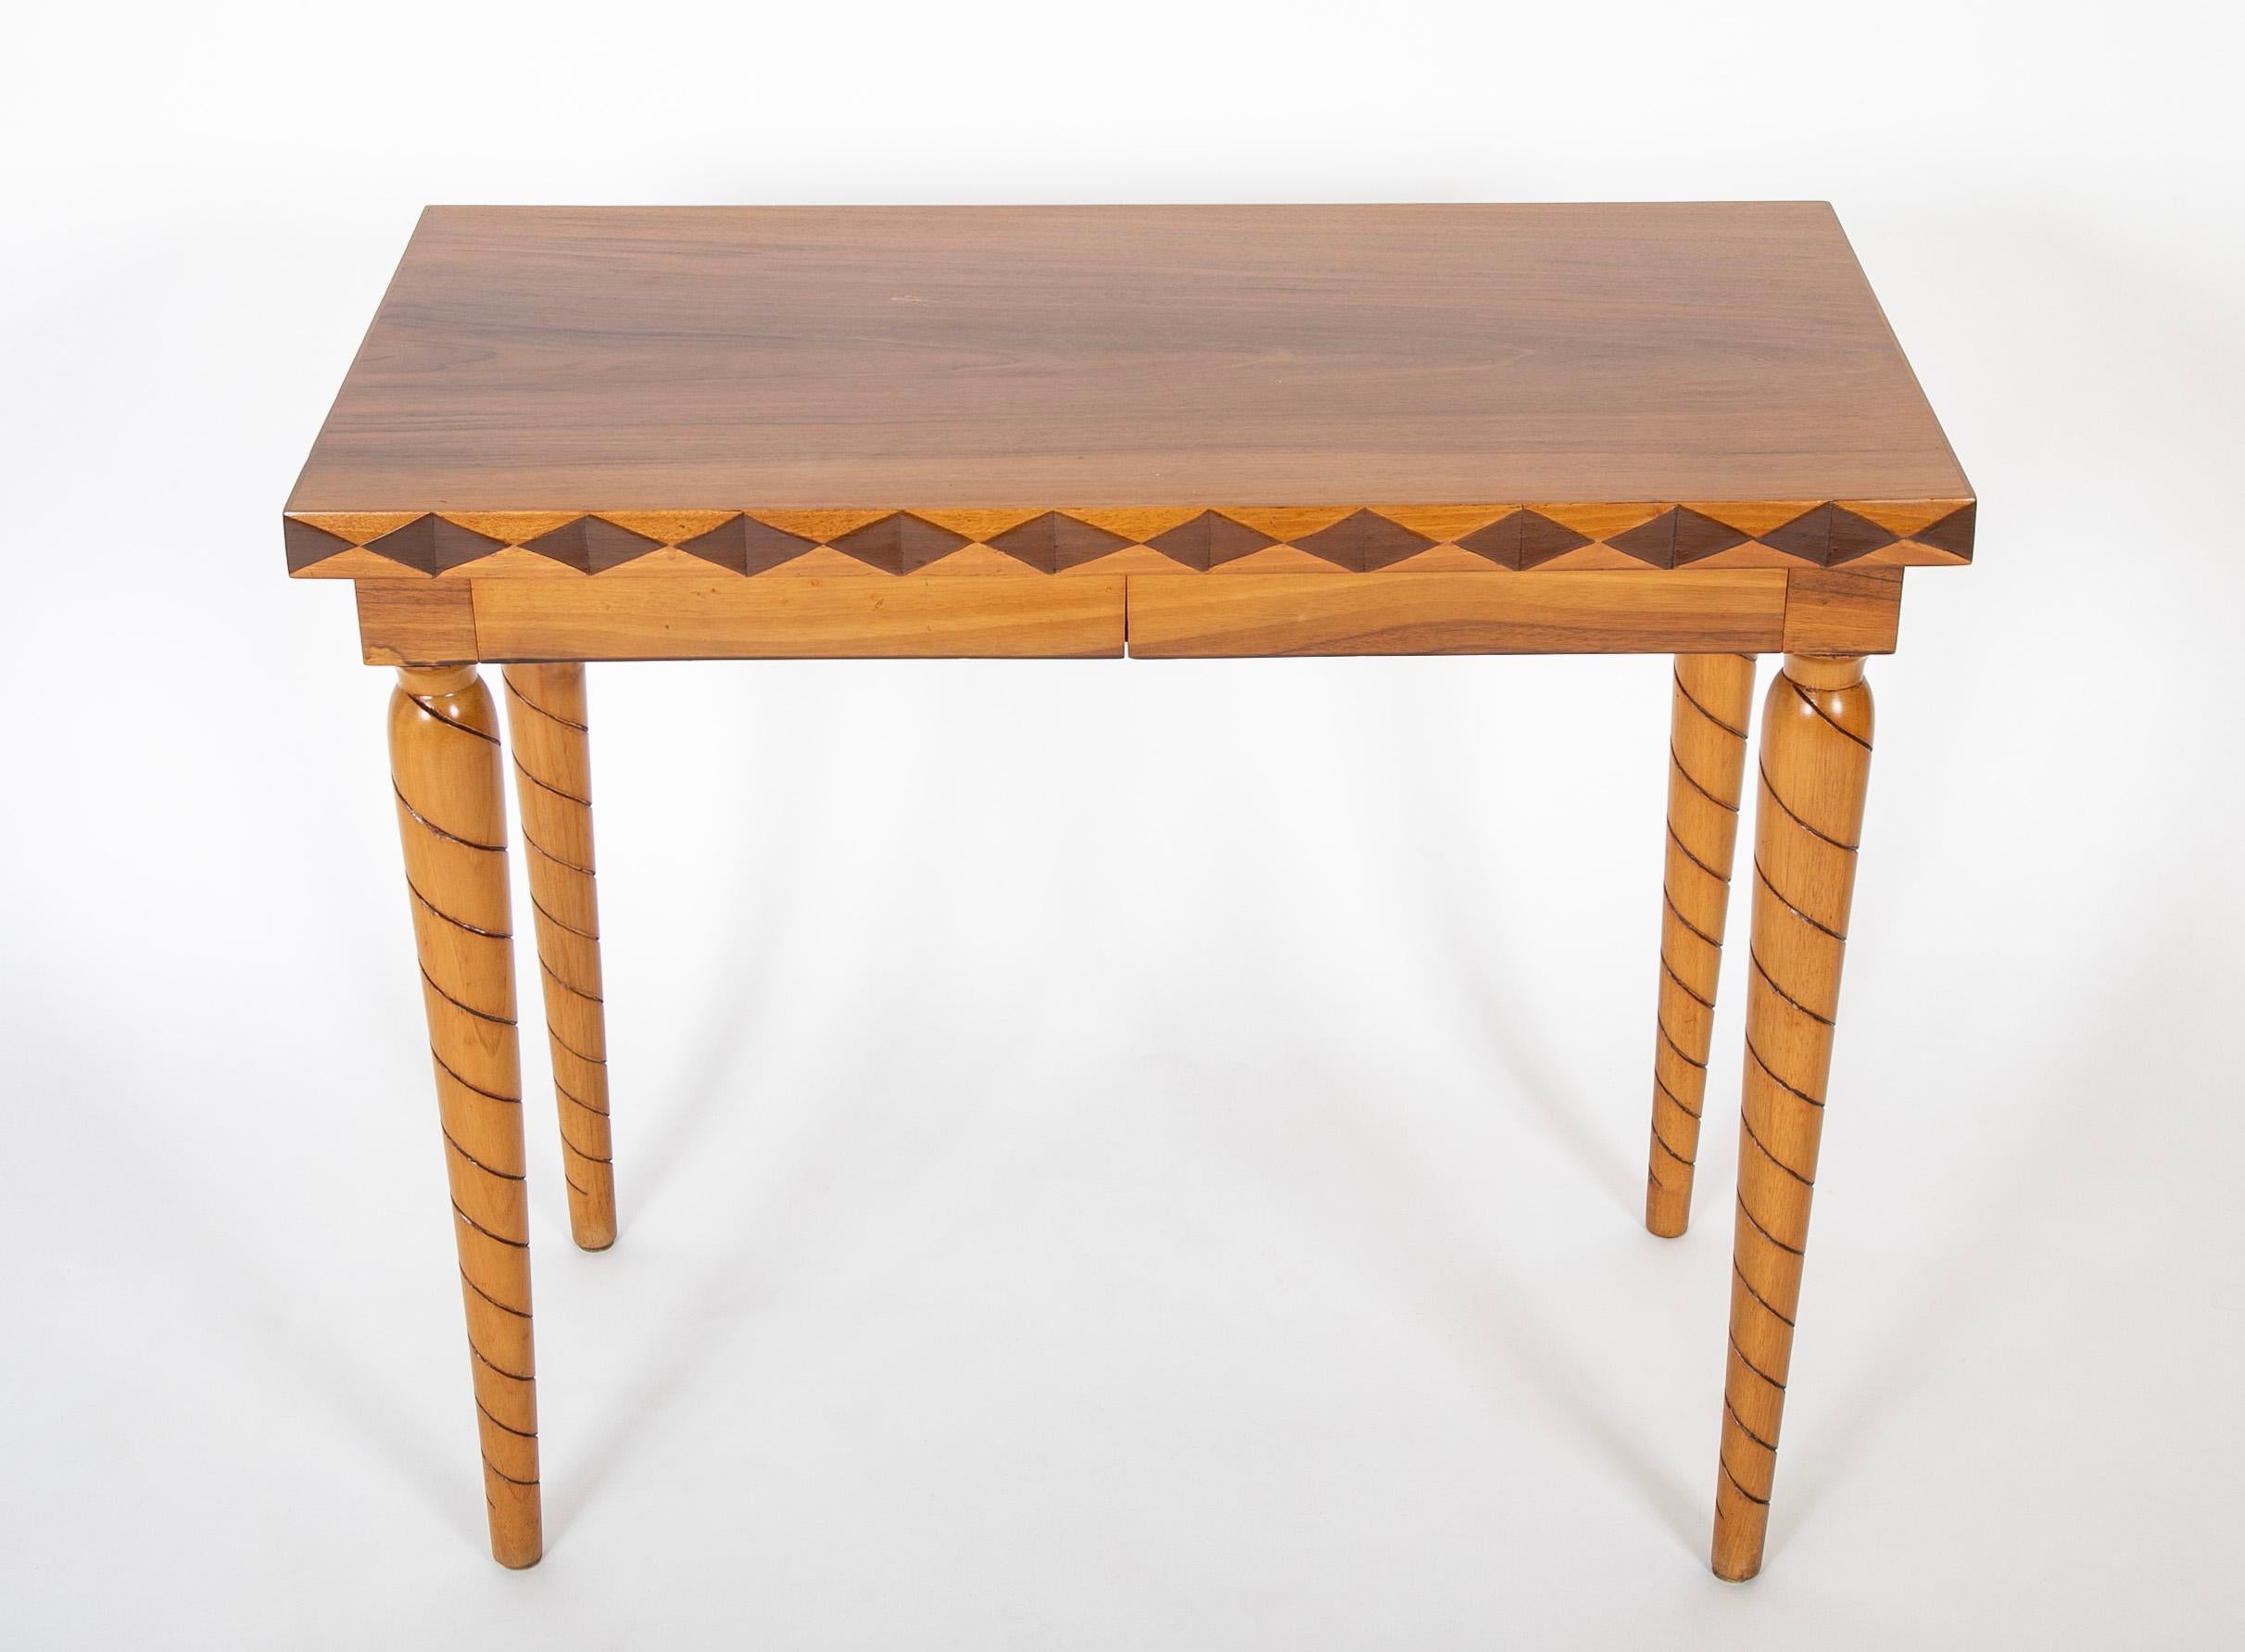 Woodwork Mid-Century Italian 2 Drawer Wooden Table with Worked Wood Design on Edge & Legs For Sale